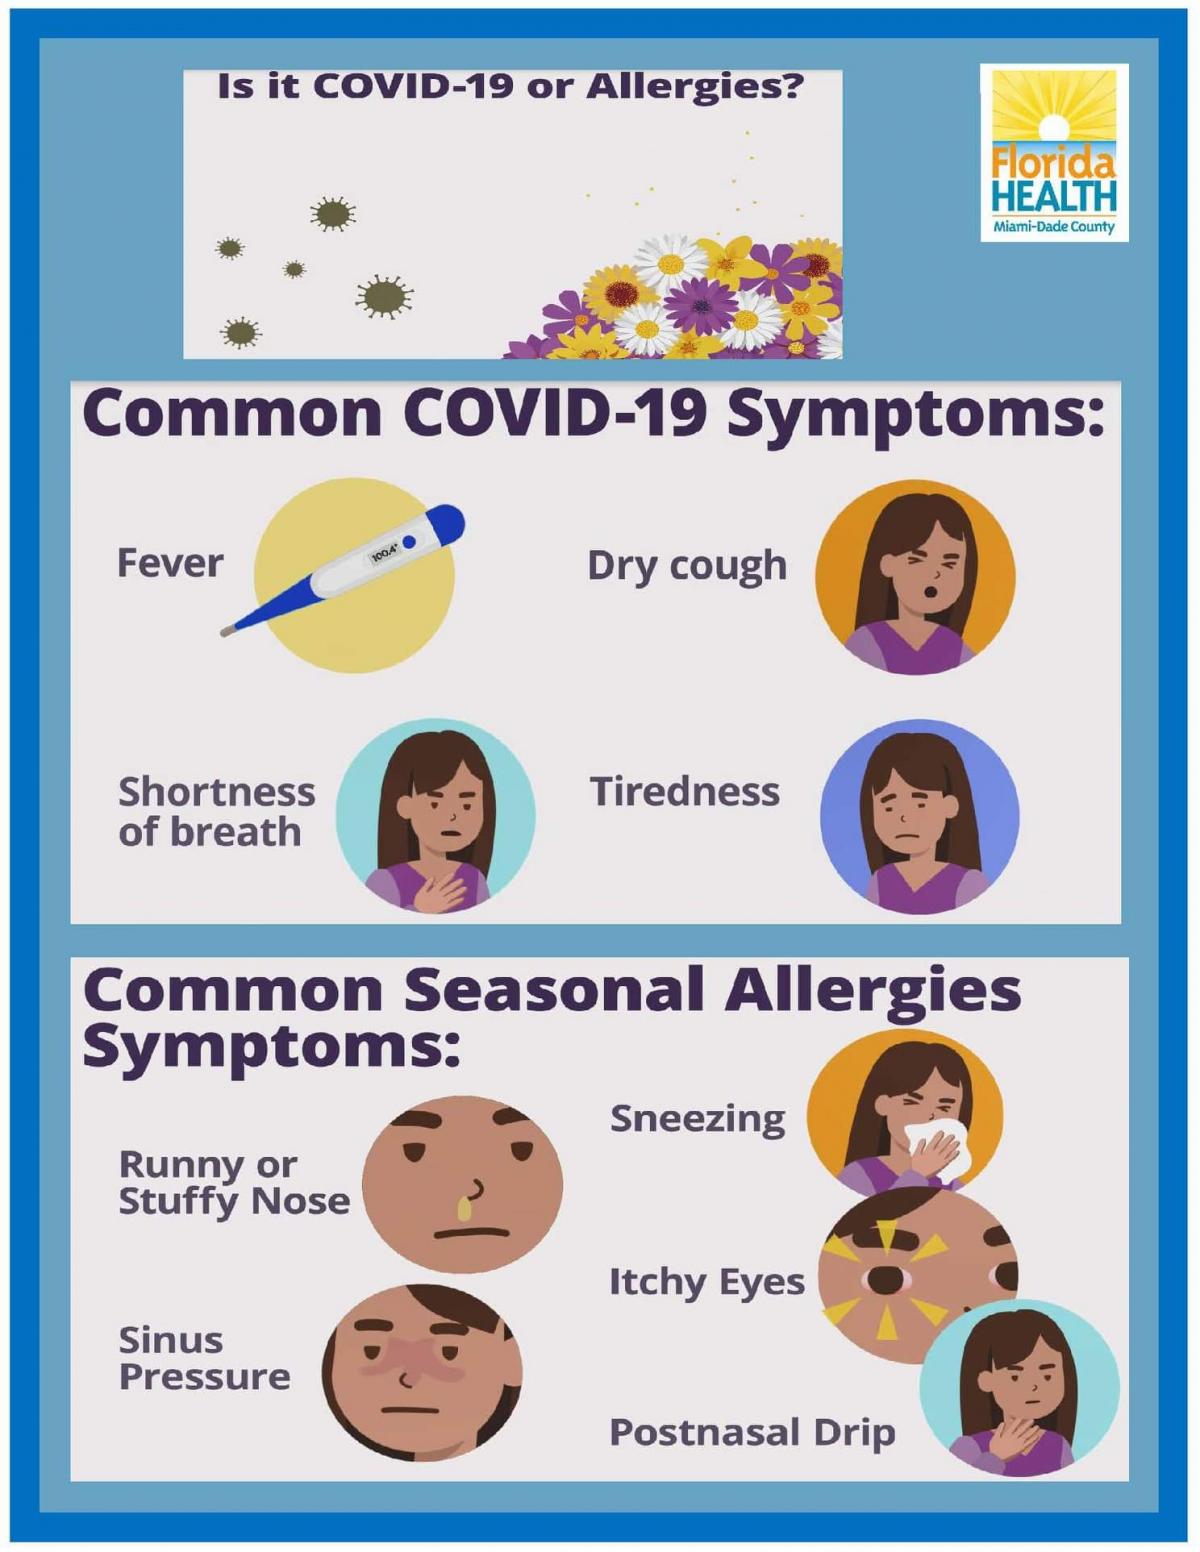 Differences in Symptoms Between COVID-19 and Allergies